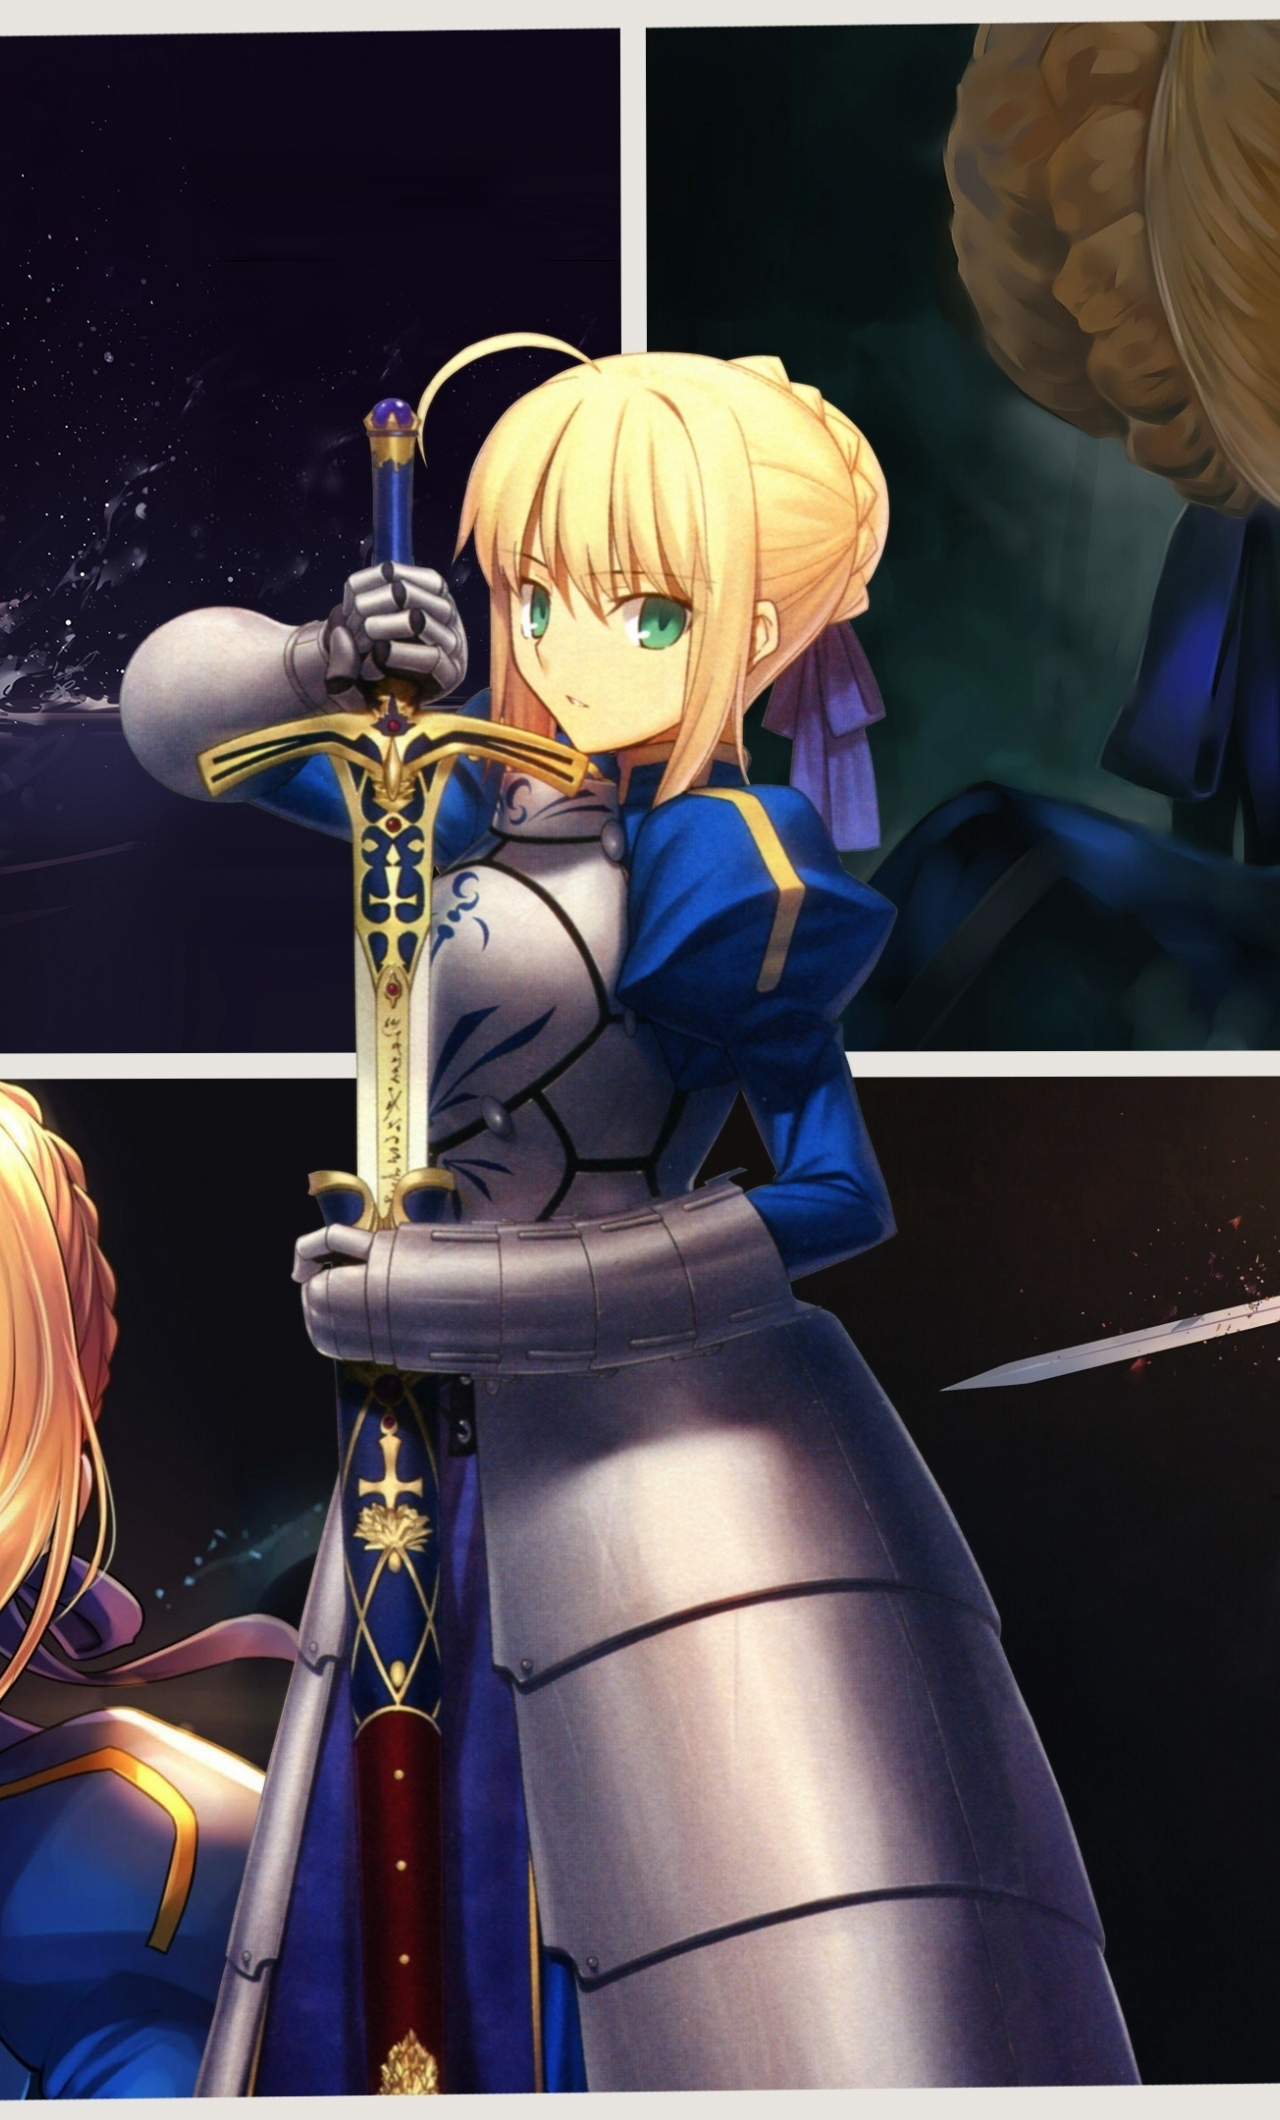 Download wallpaper 1280x2120 collage, saber alter, angry, anime girl ...